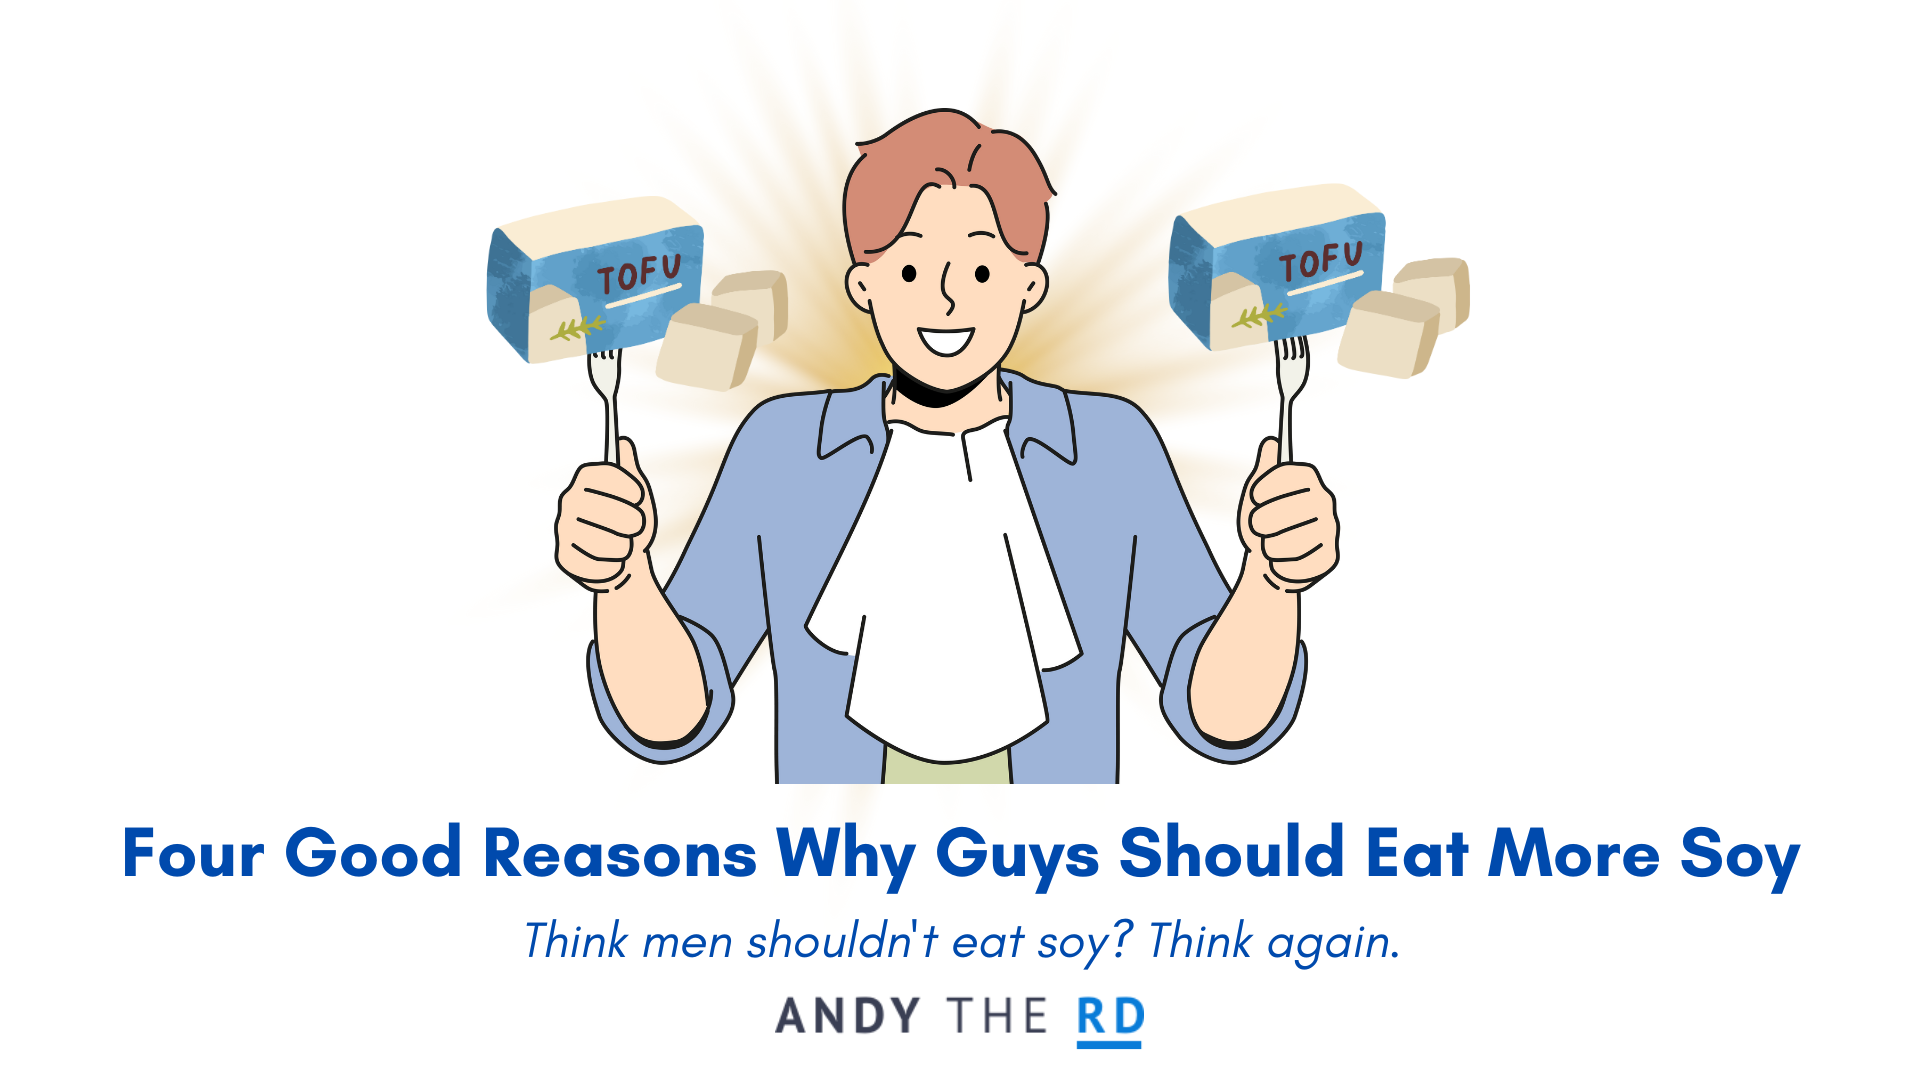 Four Good Reasons Why Guys Should Eat More Soy